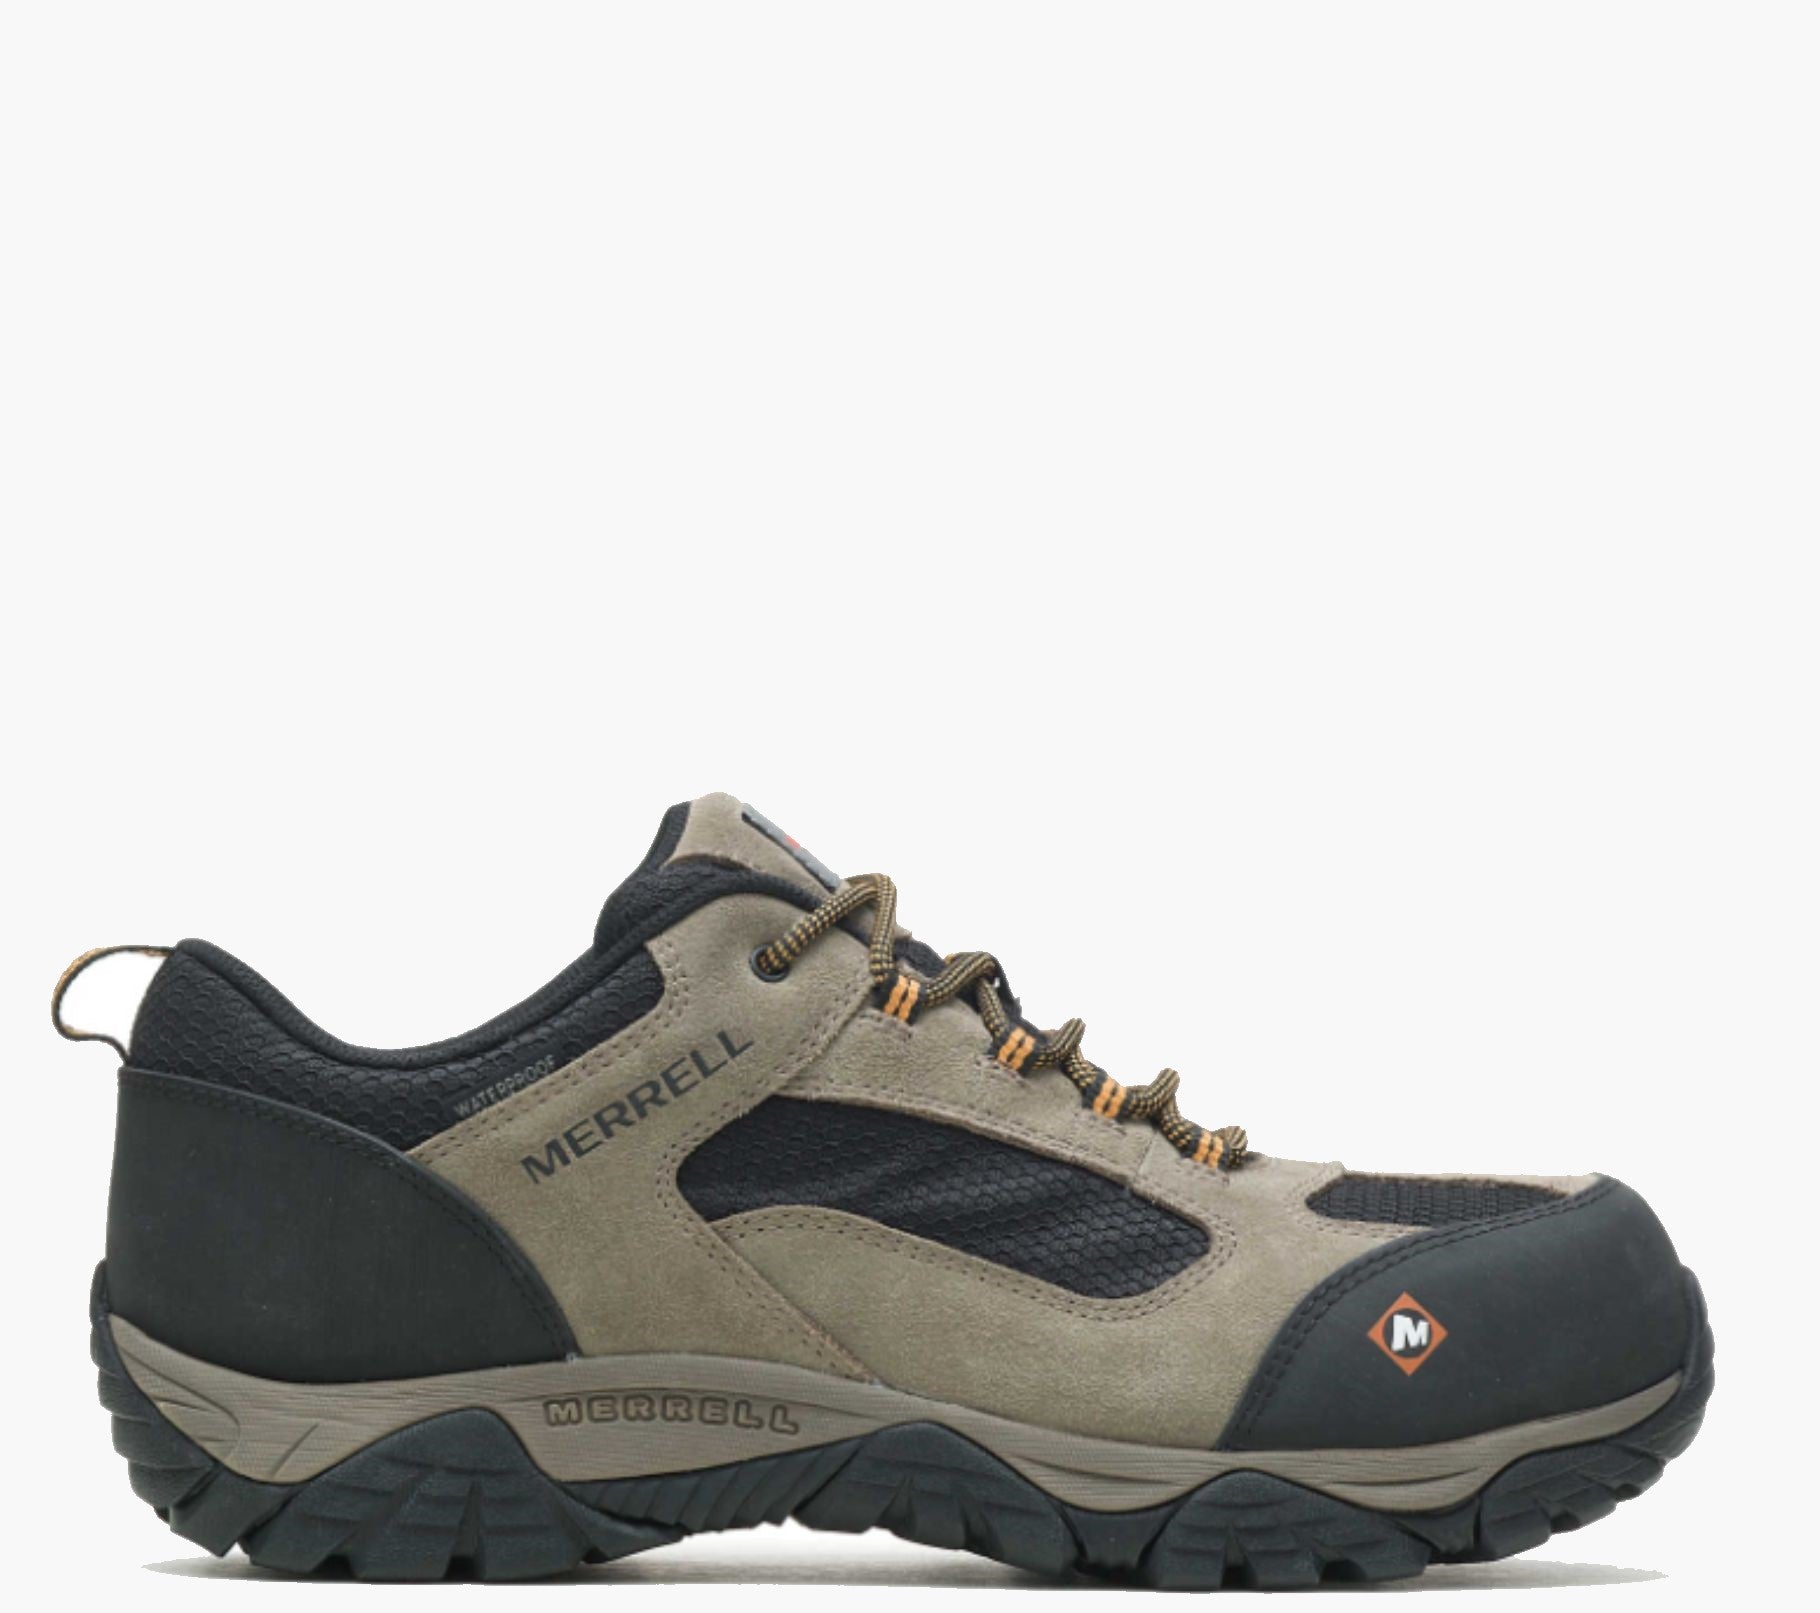 Merrell Work Moab Onset WP EH CT Work Shoe - Work World - Workwear, Work Boots, Safety Gear